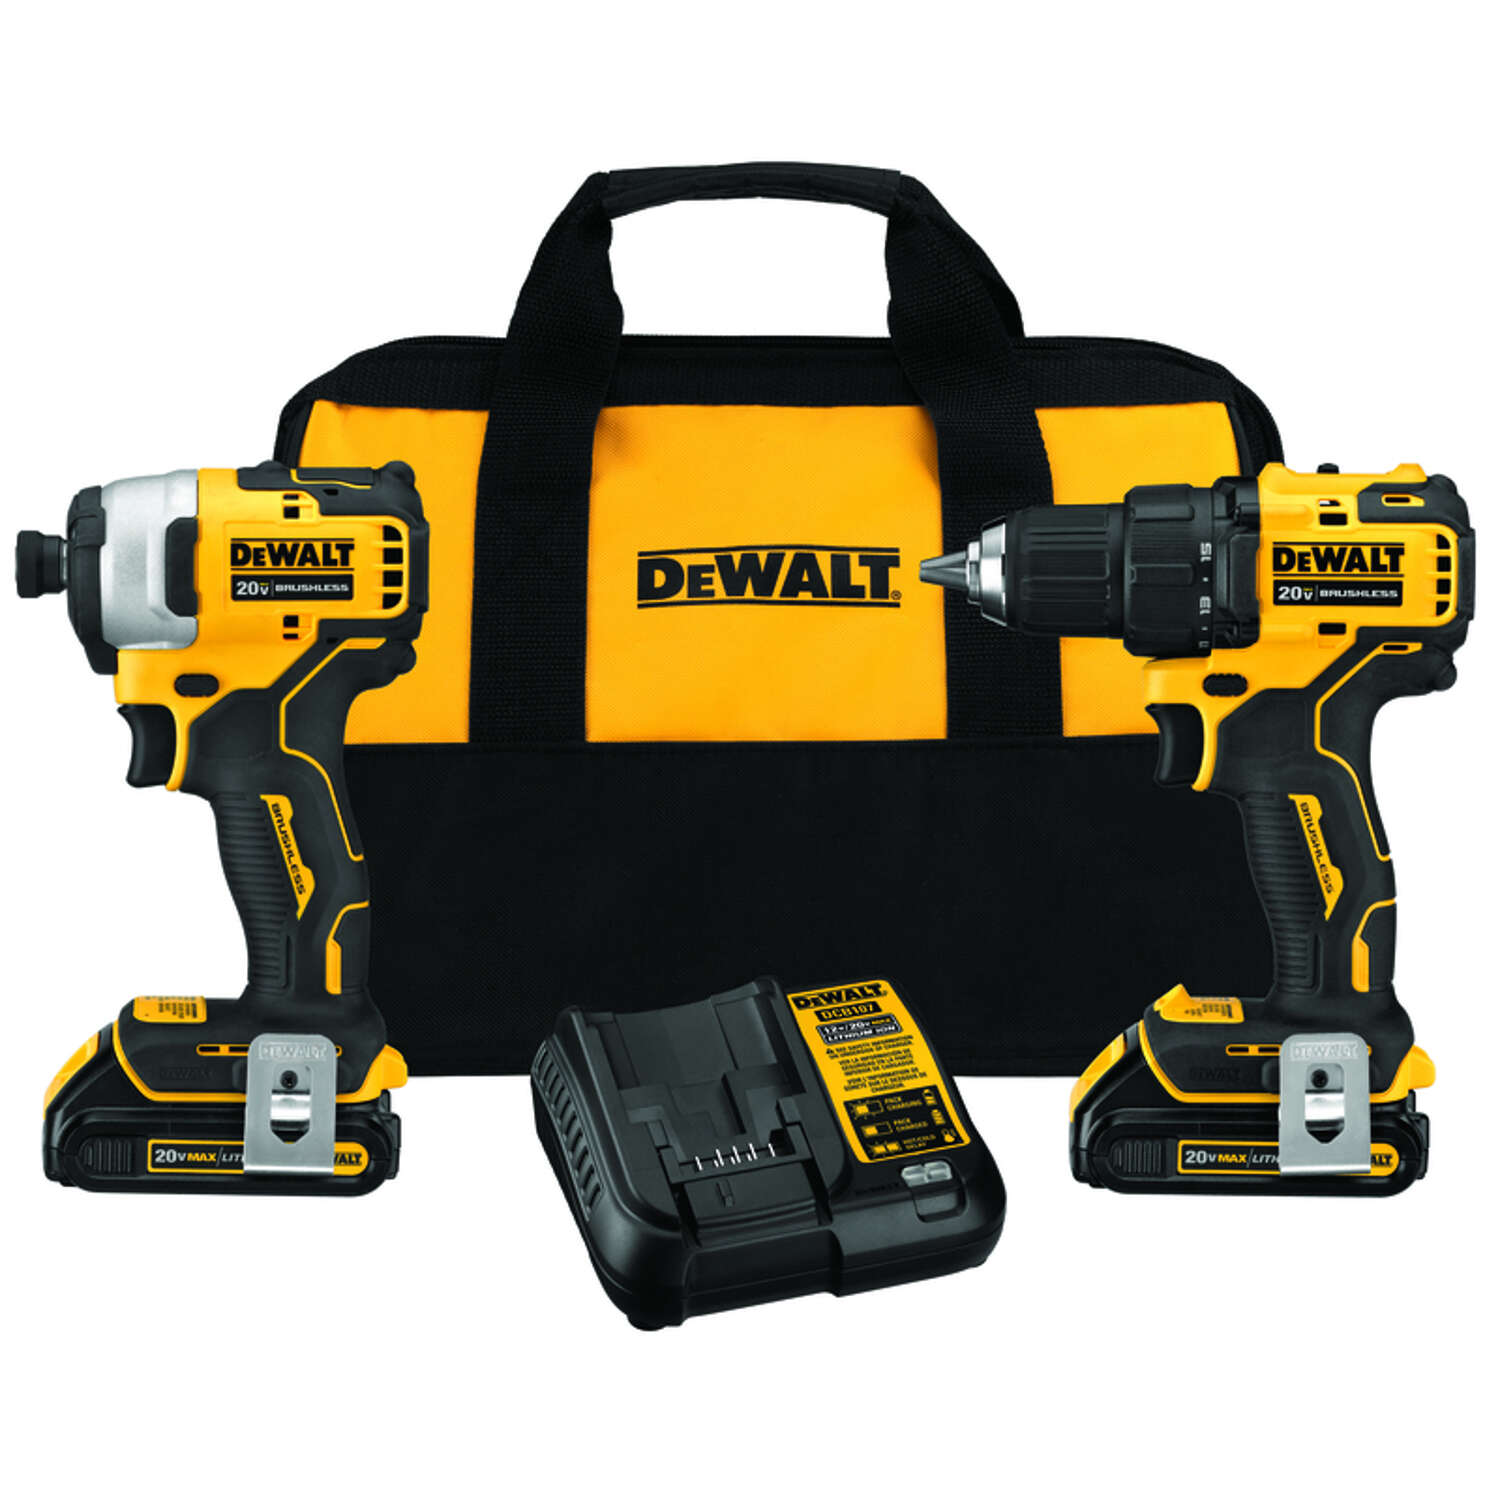 DeWalt 20 V Cordless Brushless 2 Tool Compact Drill and Impact Driver Kit